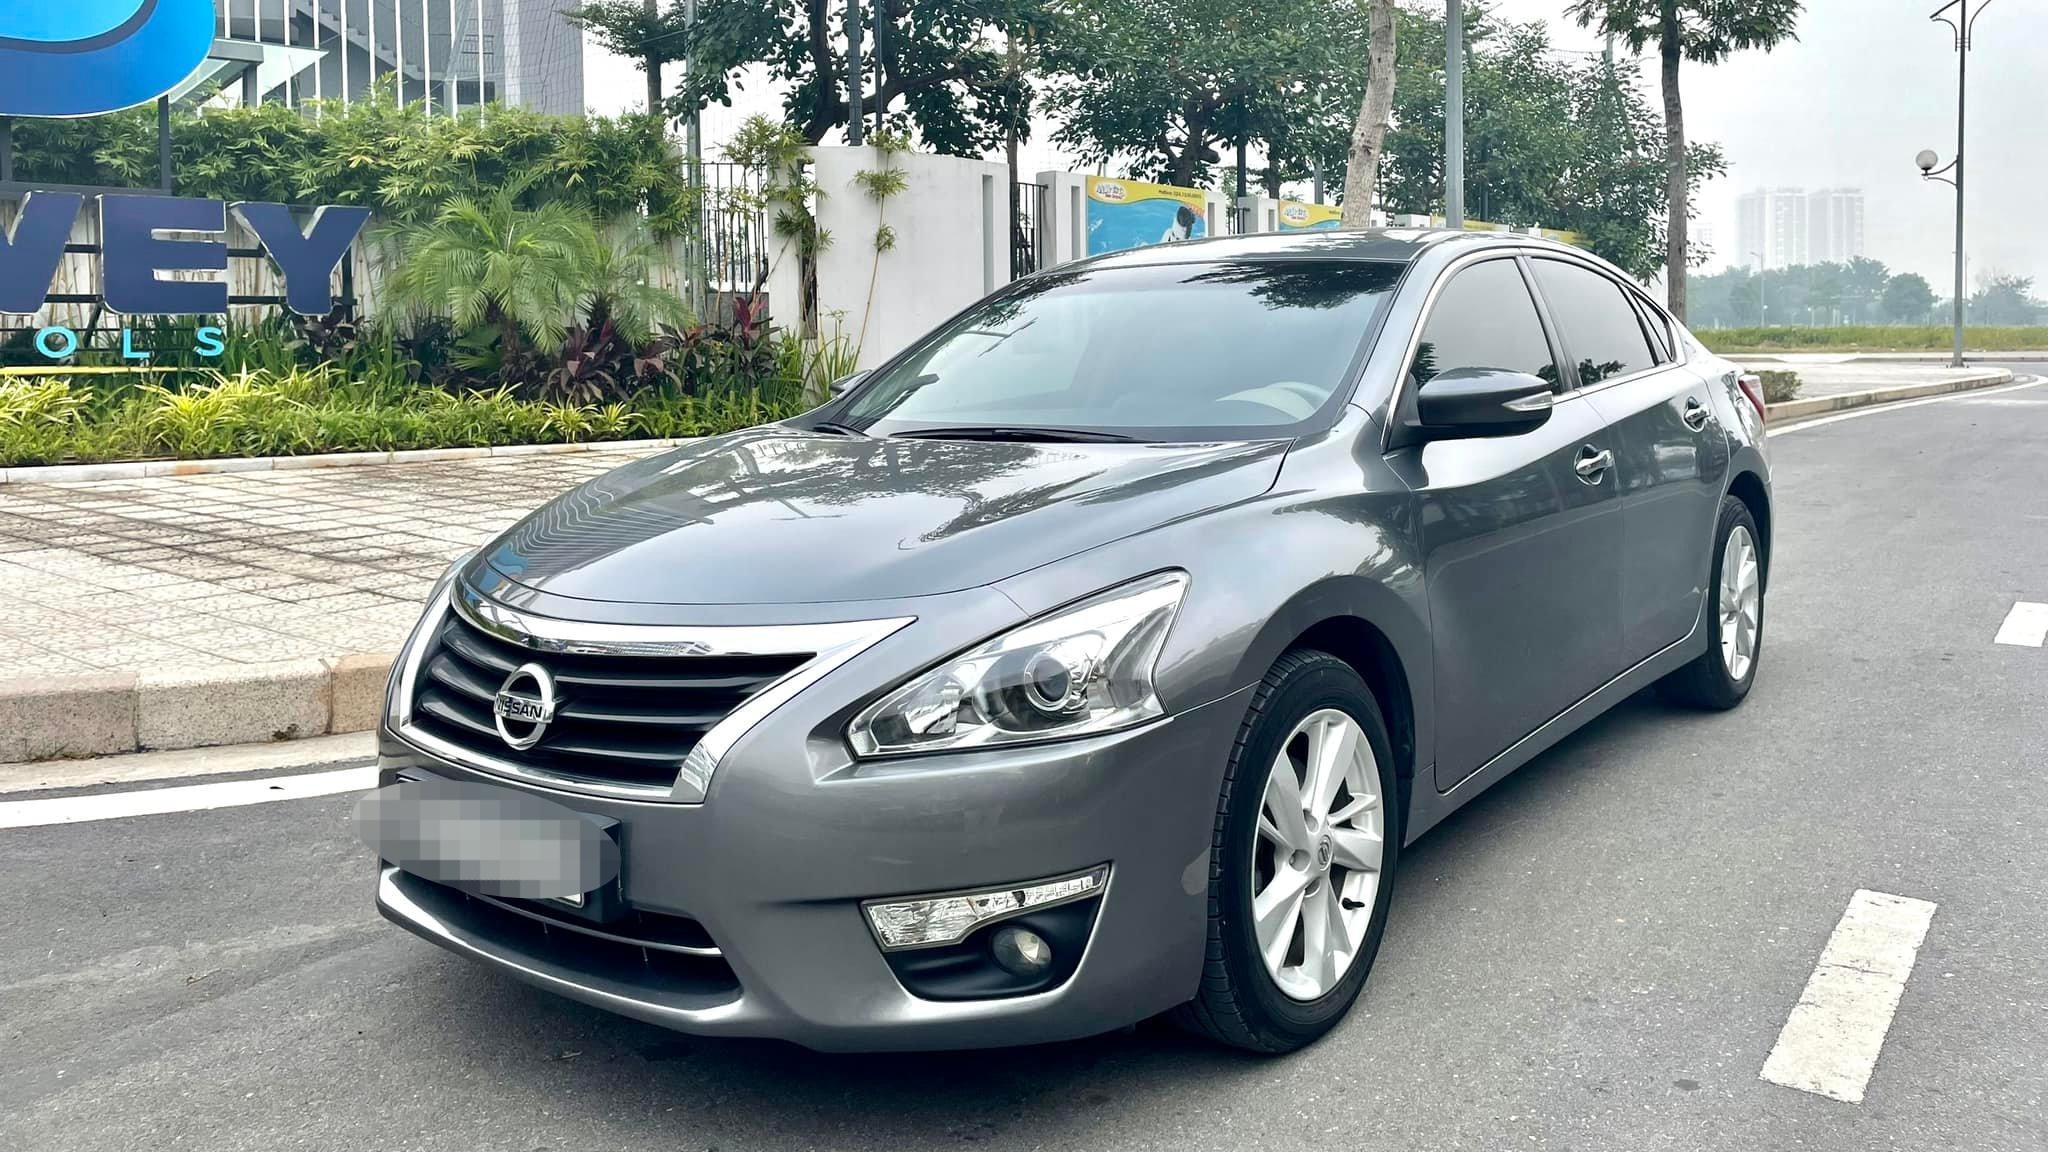 Nissan Teana 20072014 Price Images Colors  Reviews  CarWale